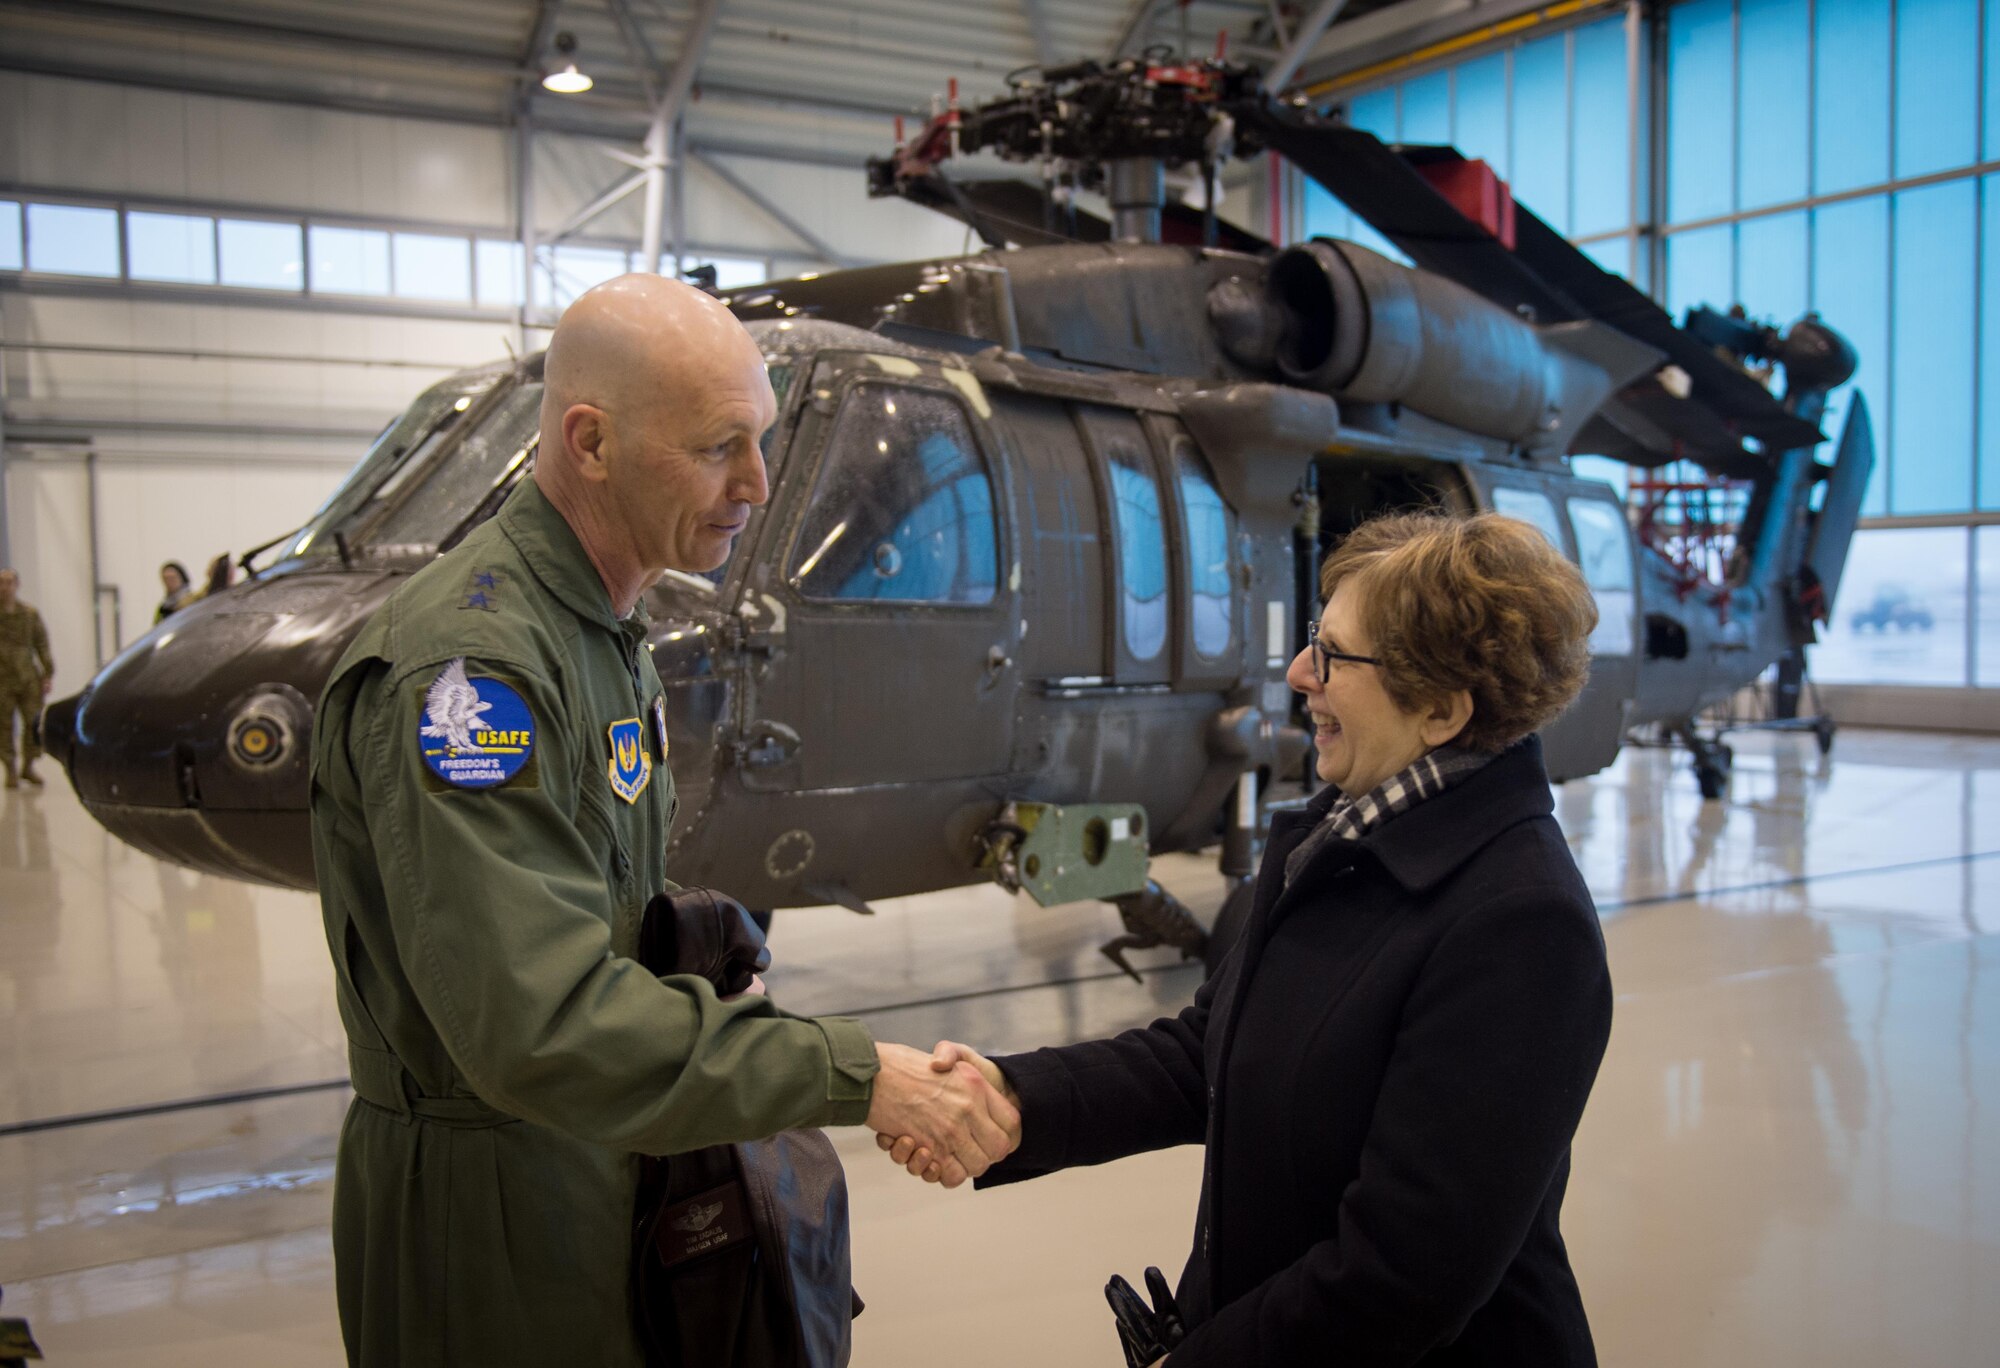 Maj. Gen. Timothy Zadalis thanks U.S. Ambassador to Latvia, Nancy Bikoff Pettit, for welcoming the U.S. military to Latvia during an event at Riga International Airport, Mar. 1, 2017. A U.S. Air Force C-5M Super Galaxy delivered UH-60 Black Hawks for the U.S. Army in Latvia. Five Black Hawk helicopters will be deployed to Latvia as part of a larger contingent of helicopters and personnel deployed to support Operation Atlantic Resolve, a U.S. commitment to maintaining peace and stability in the European region. (U.S. Air Force photo/Tech. Sgt. Ryan Crane)